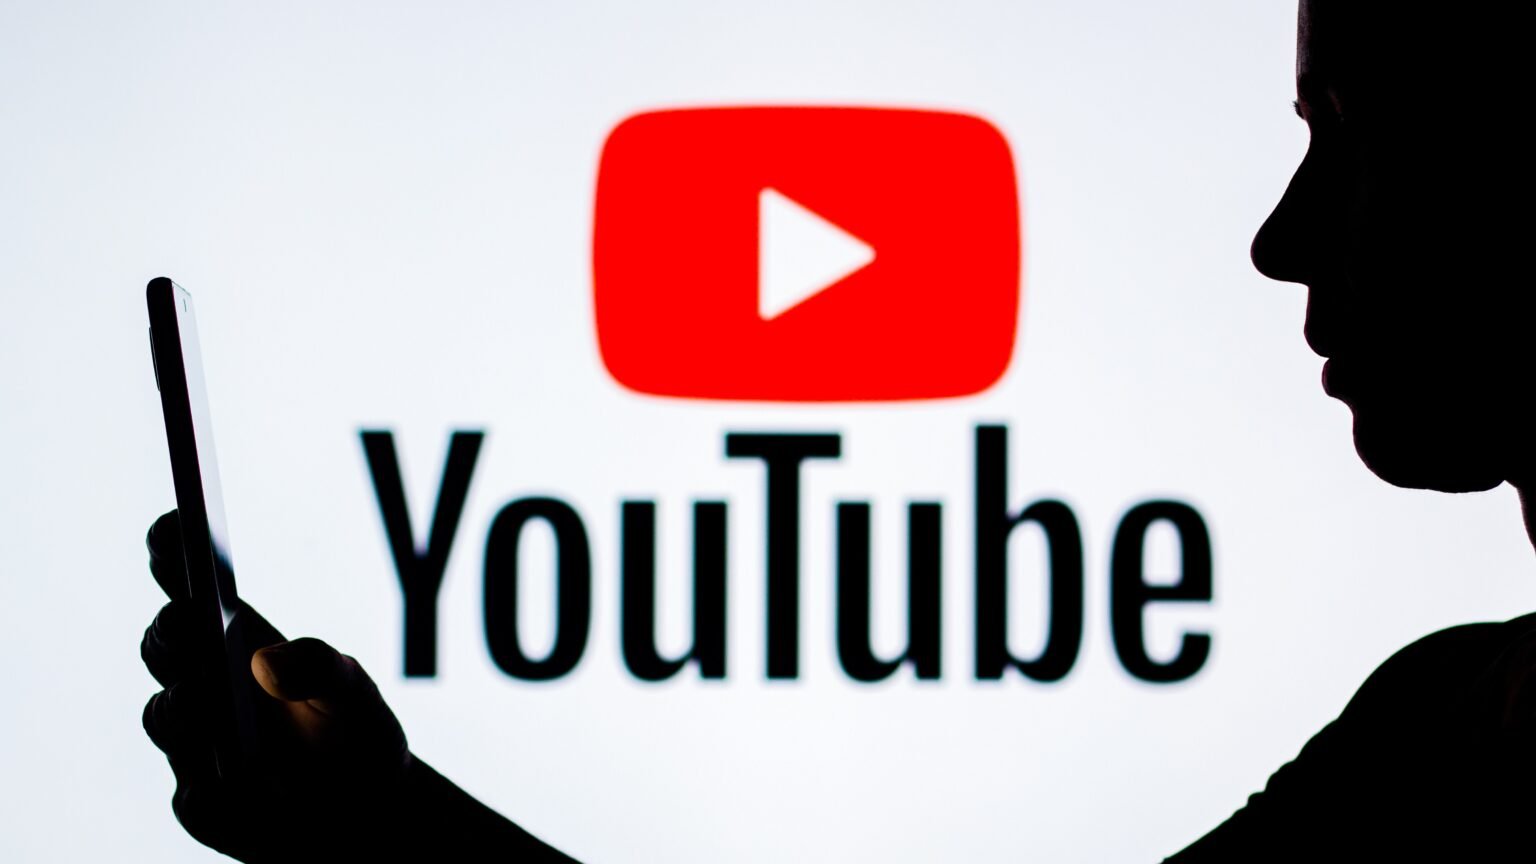 youtube’s-ai-powered-‘jump-ahead’-experiment-sees-wider-availability